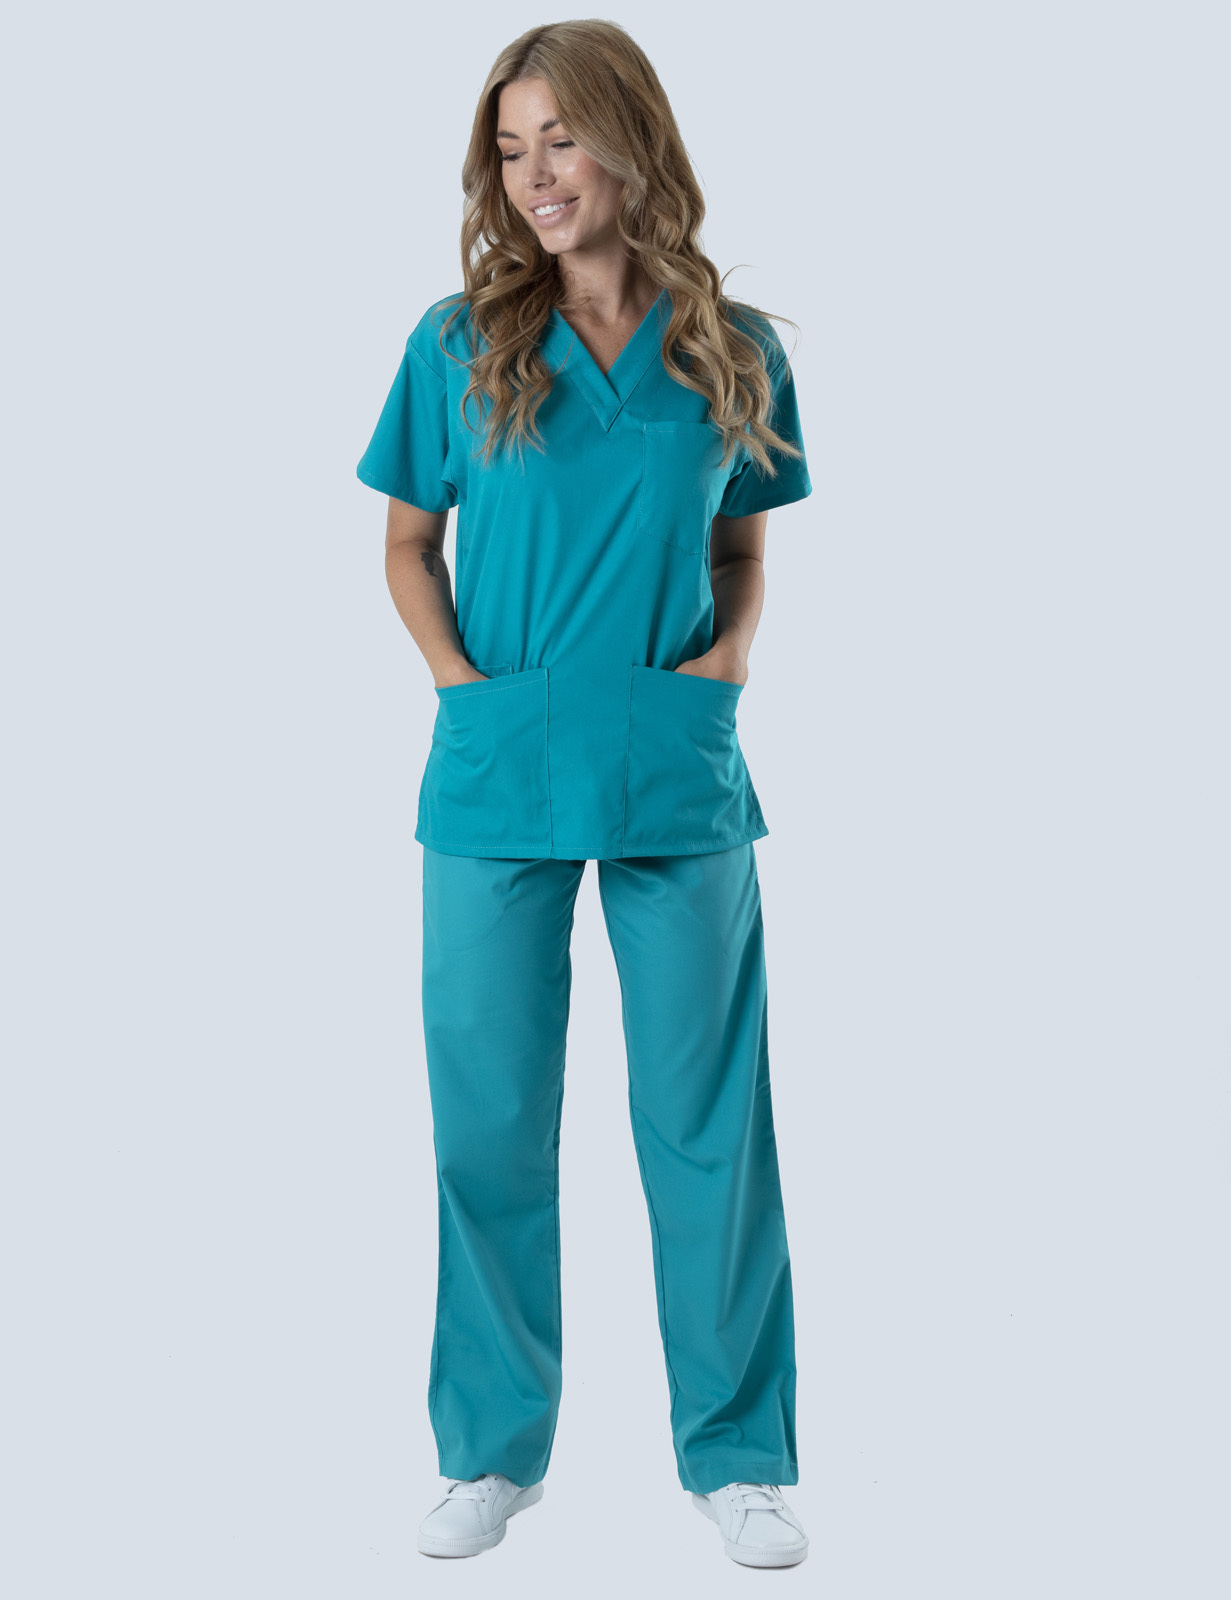 RBWH - Grantley Stable Neonatal (4 Pocket Scrub Top and Cargo Pants in Teal incl Logos)